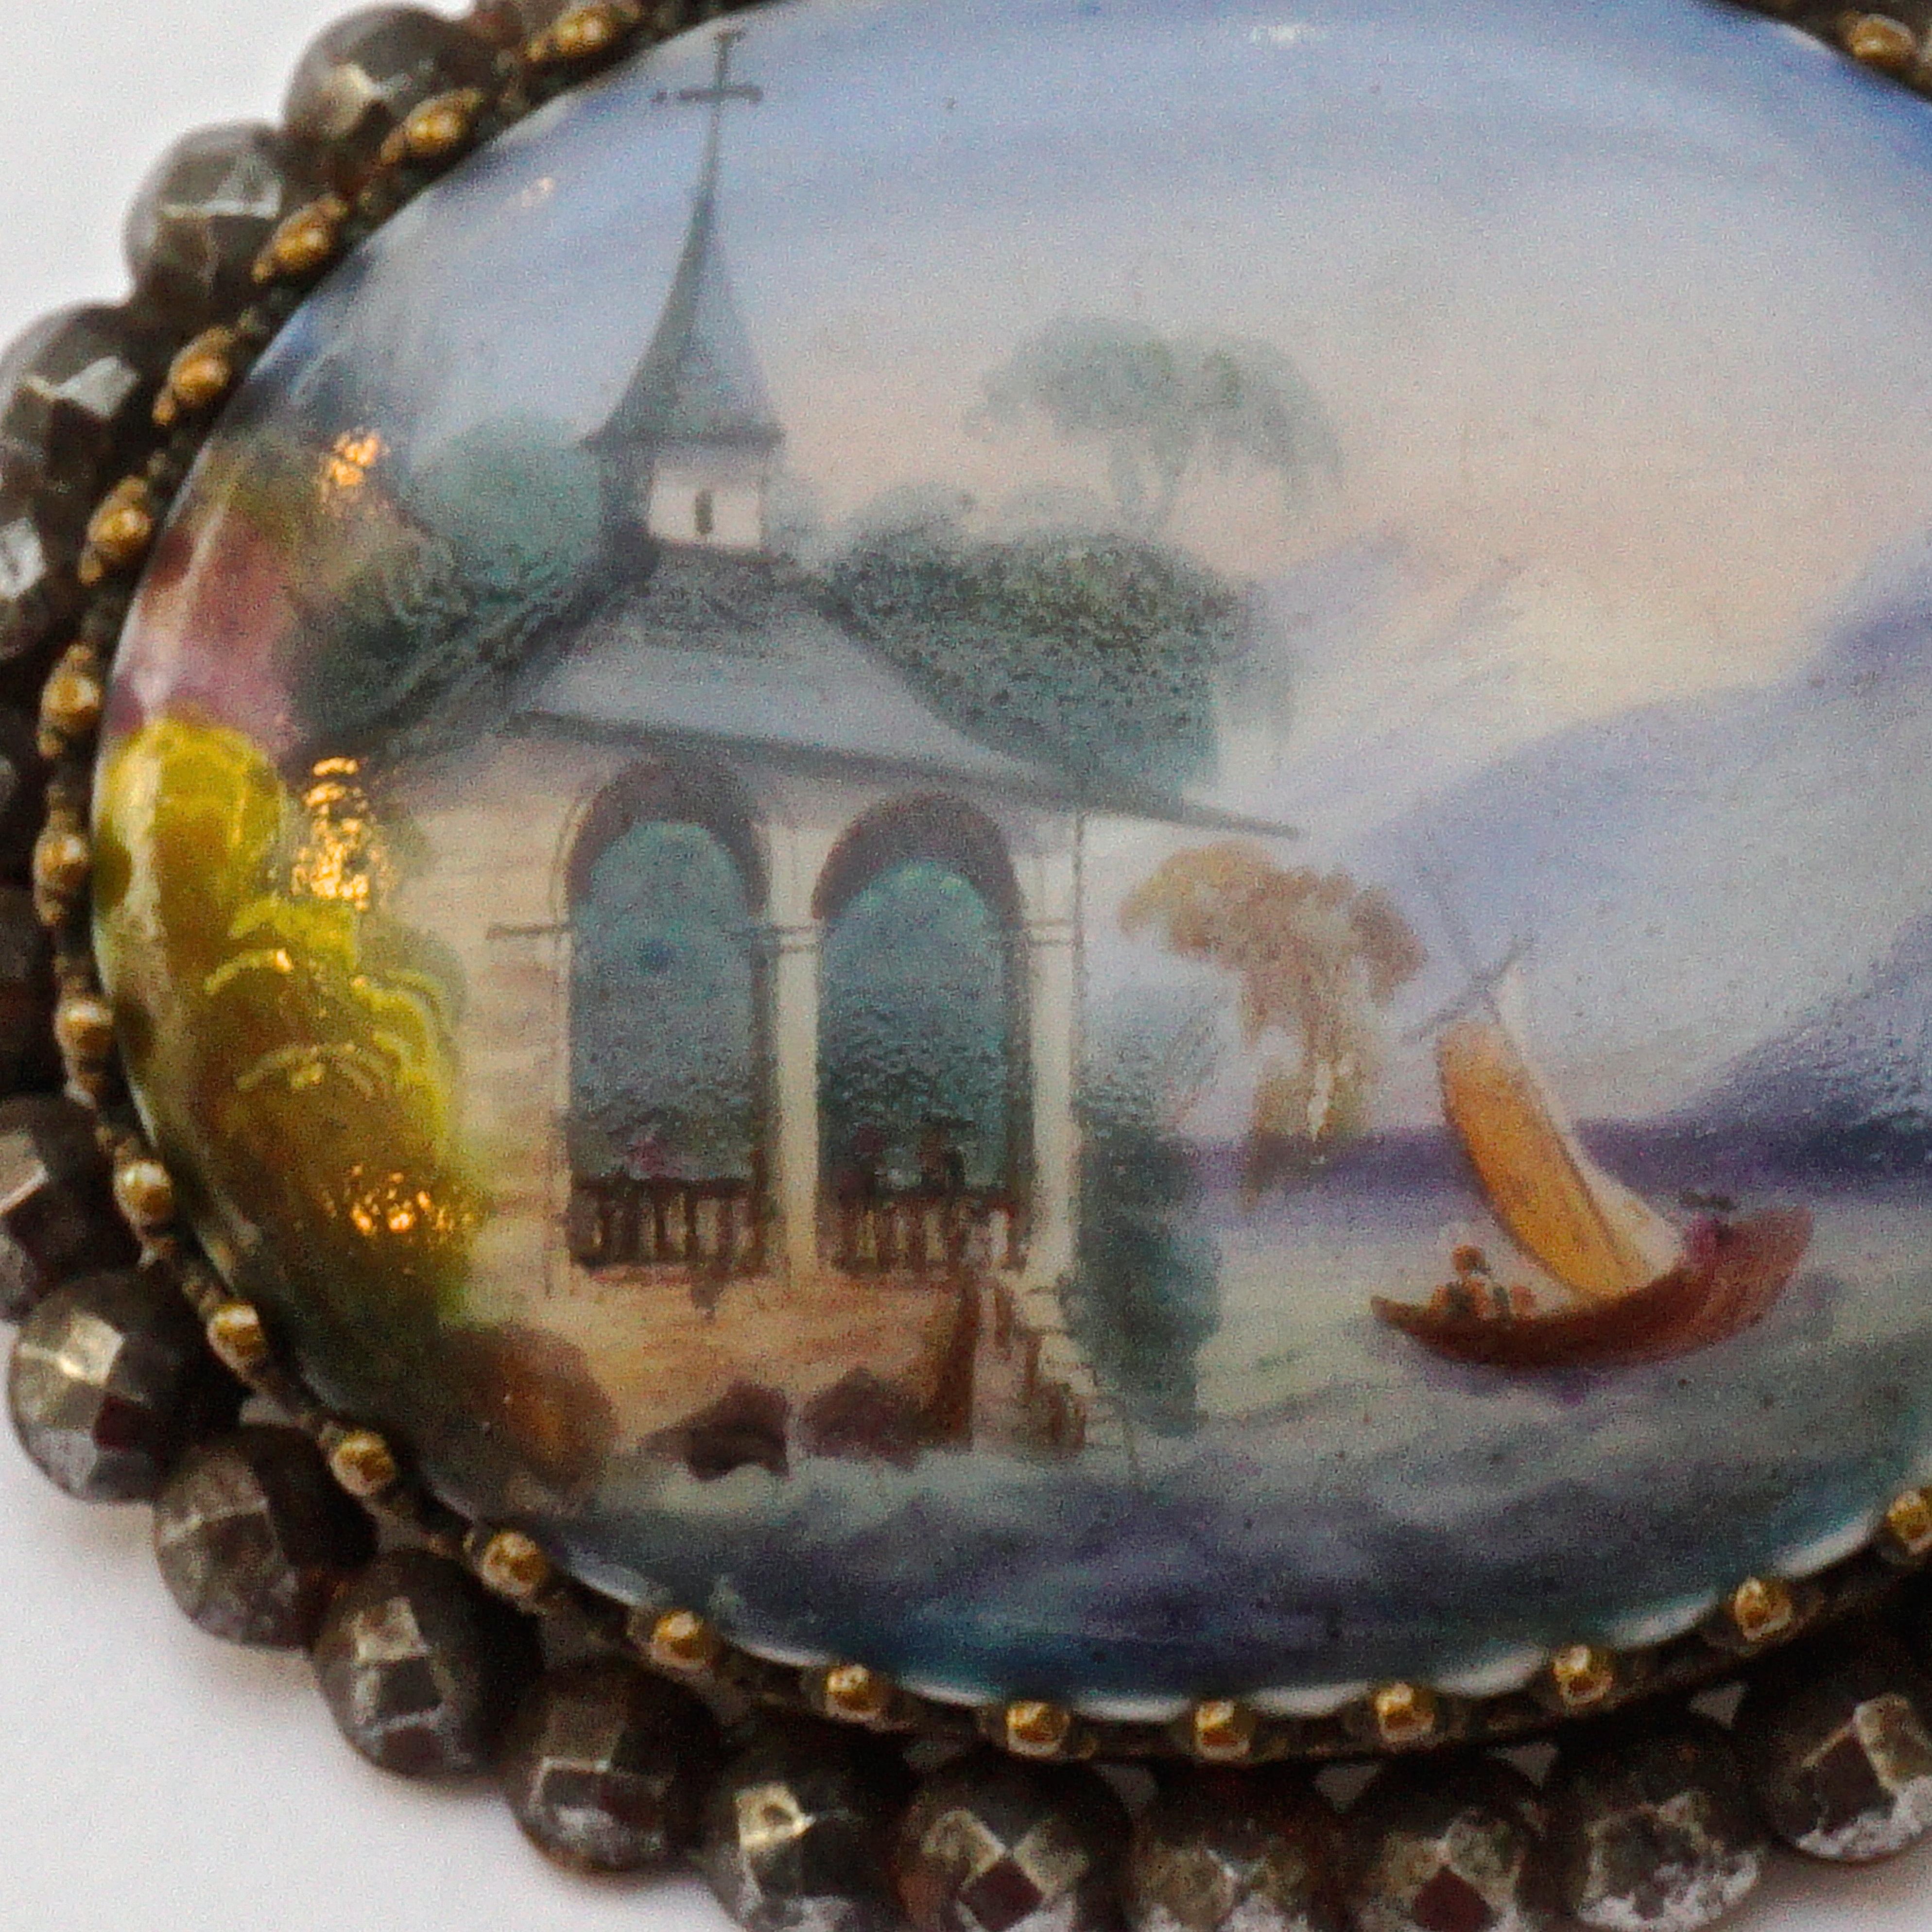 Antique Victorian painted porcelain brooch in an ornate setting with a cut steel edging. The beautiful painted picture is wonderfully detailed. Measuring length 4.1cm / 1.6 inches by width 3.5cm / 1.37 inches. It has the old 